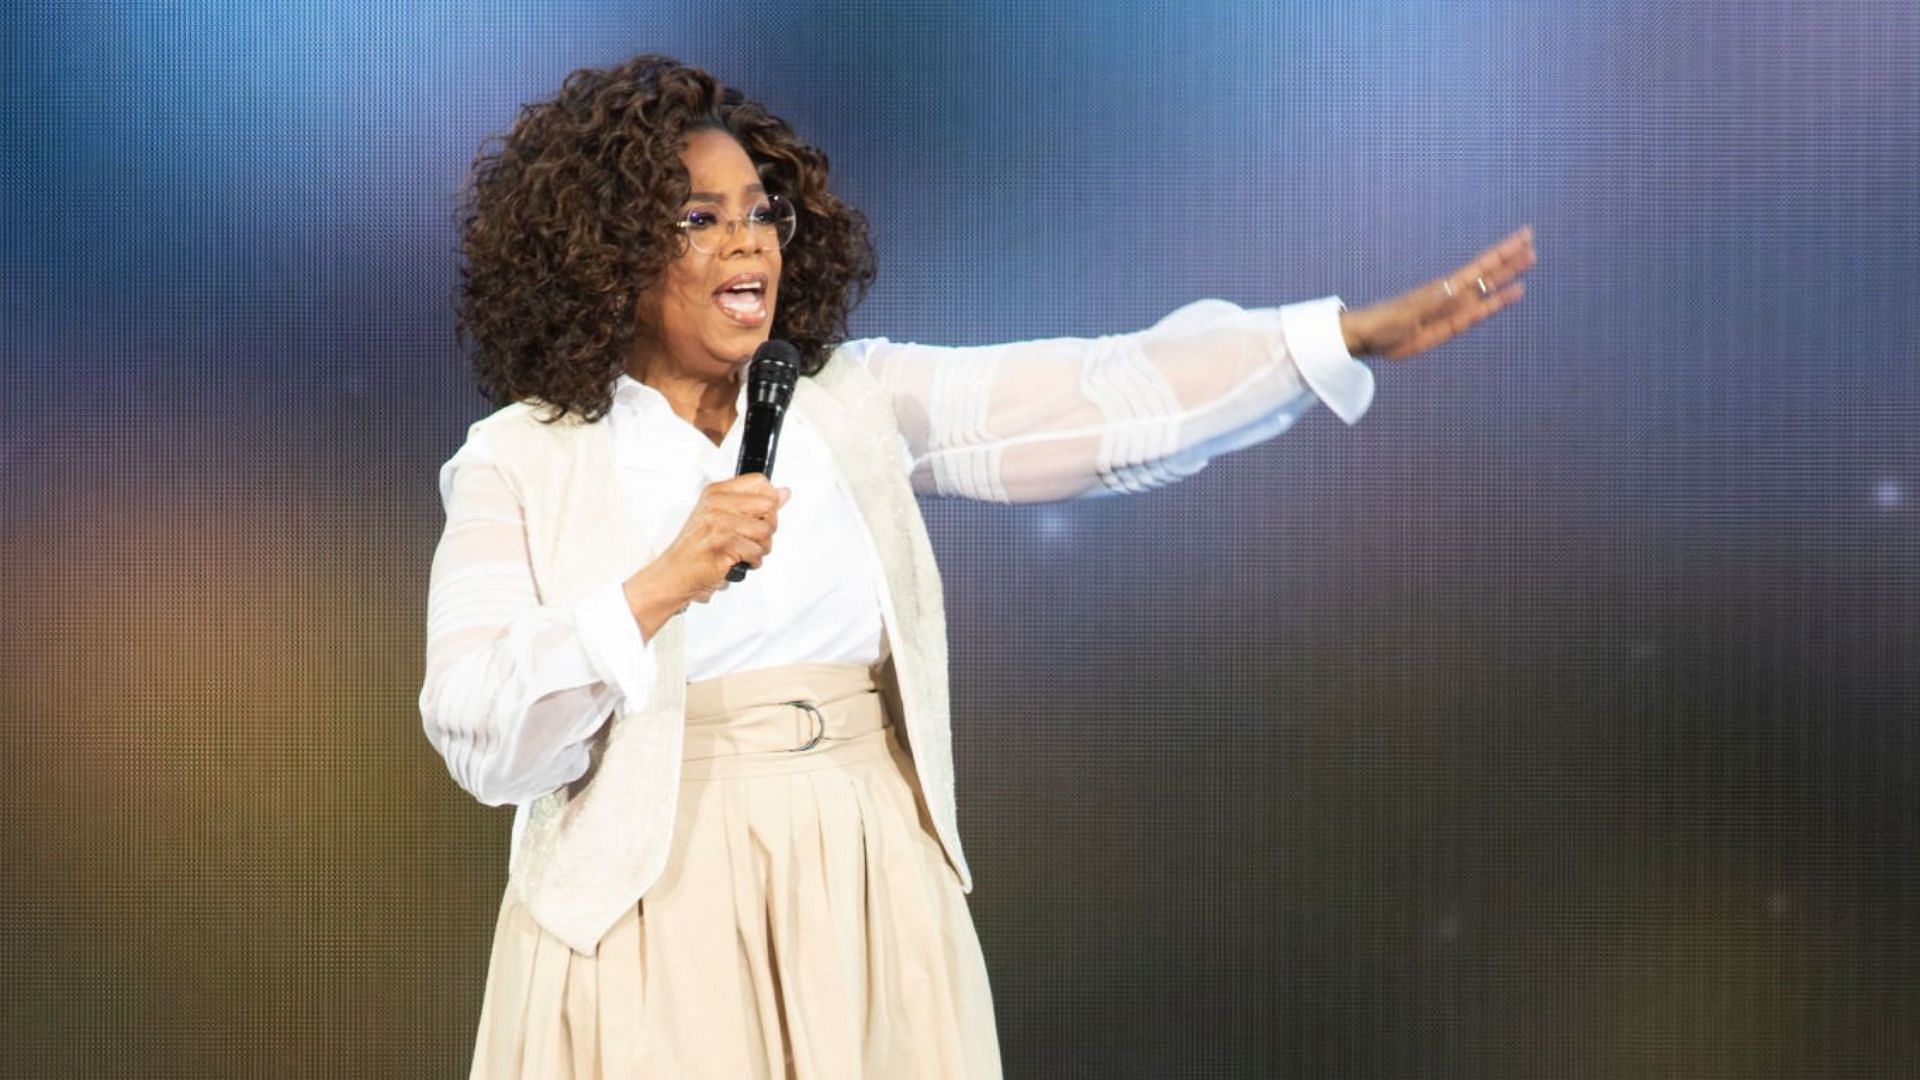 Facebook advertisements have been showing Oprah Winfrey advertising her alleged brand of weight loss gummy bears (Image via Tom Cooper/Getty Images)